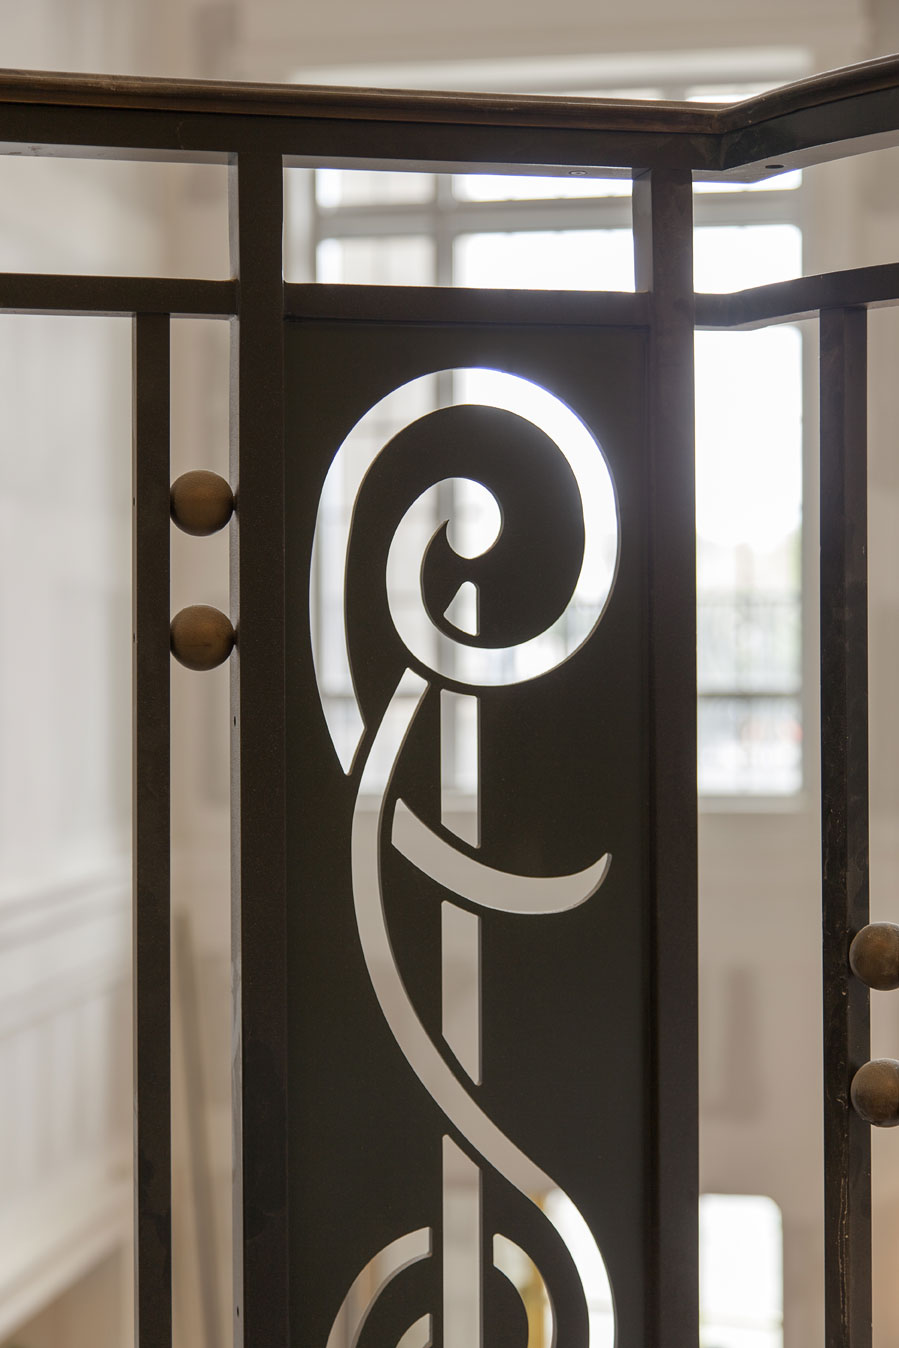 Base and treble clef notes inspired the railing designs, with much of the millwork sourced locally.